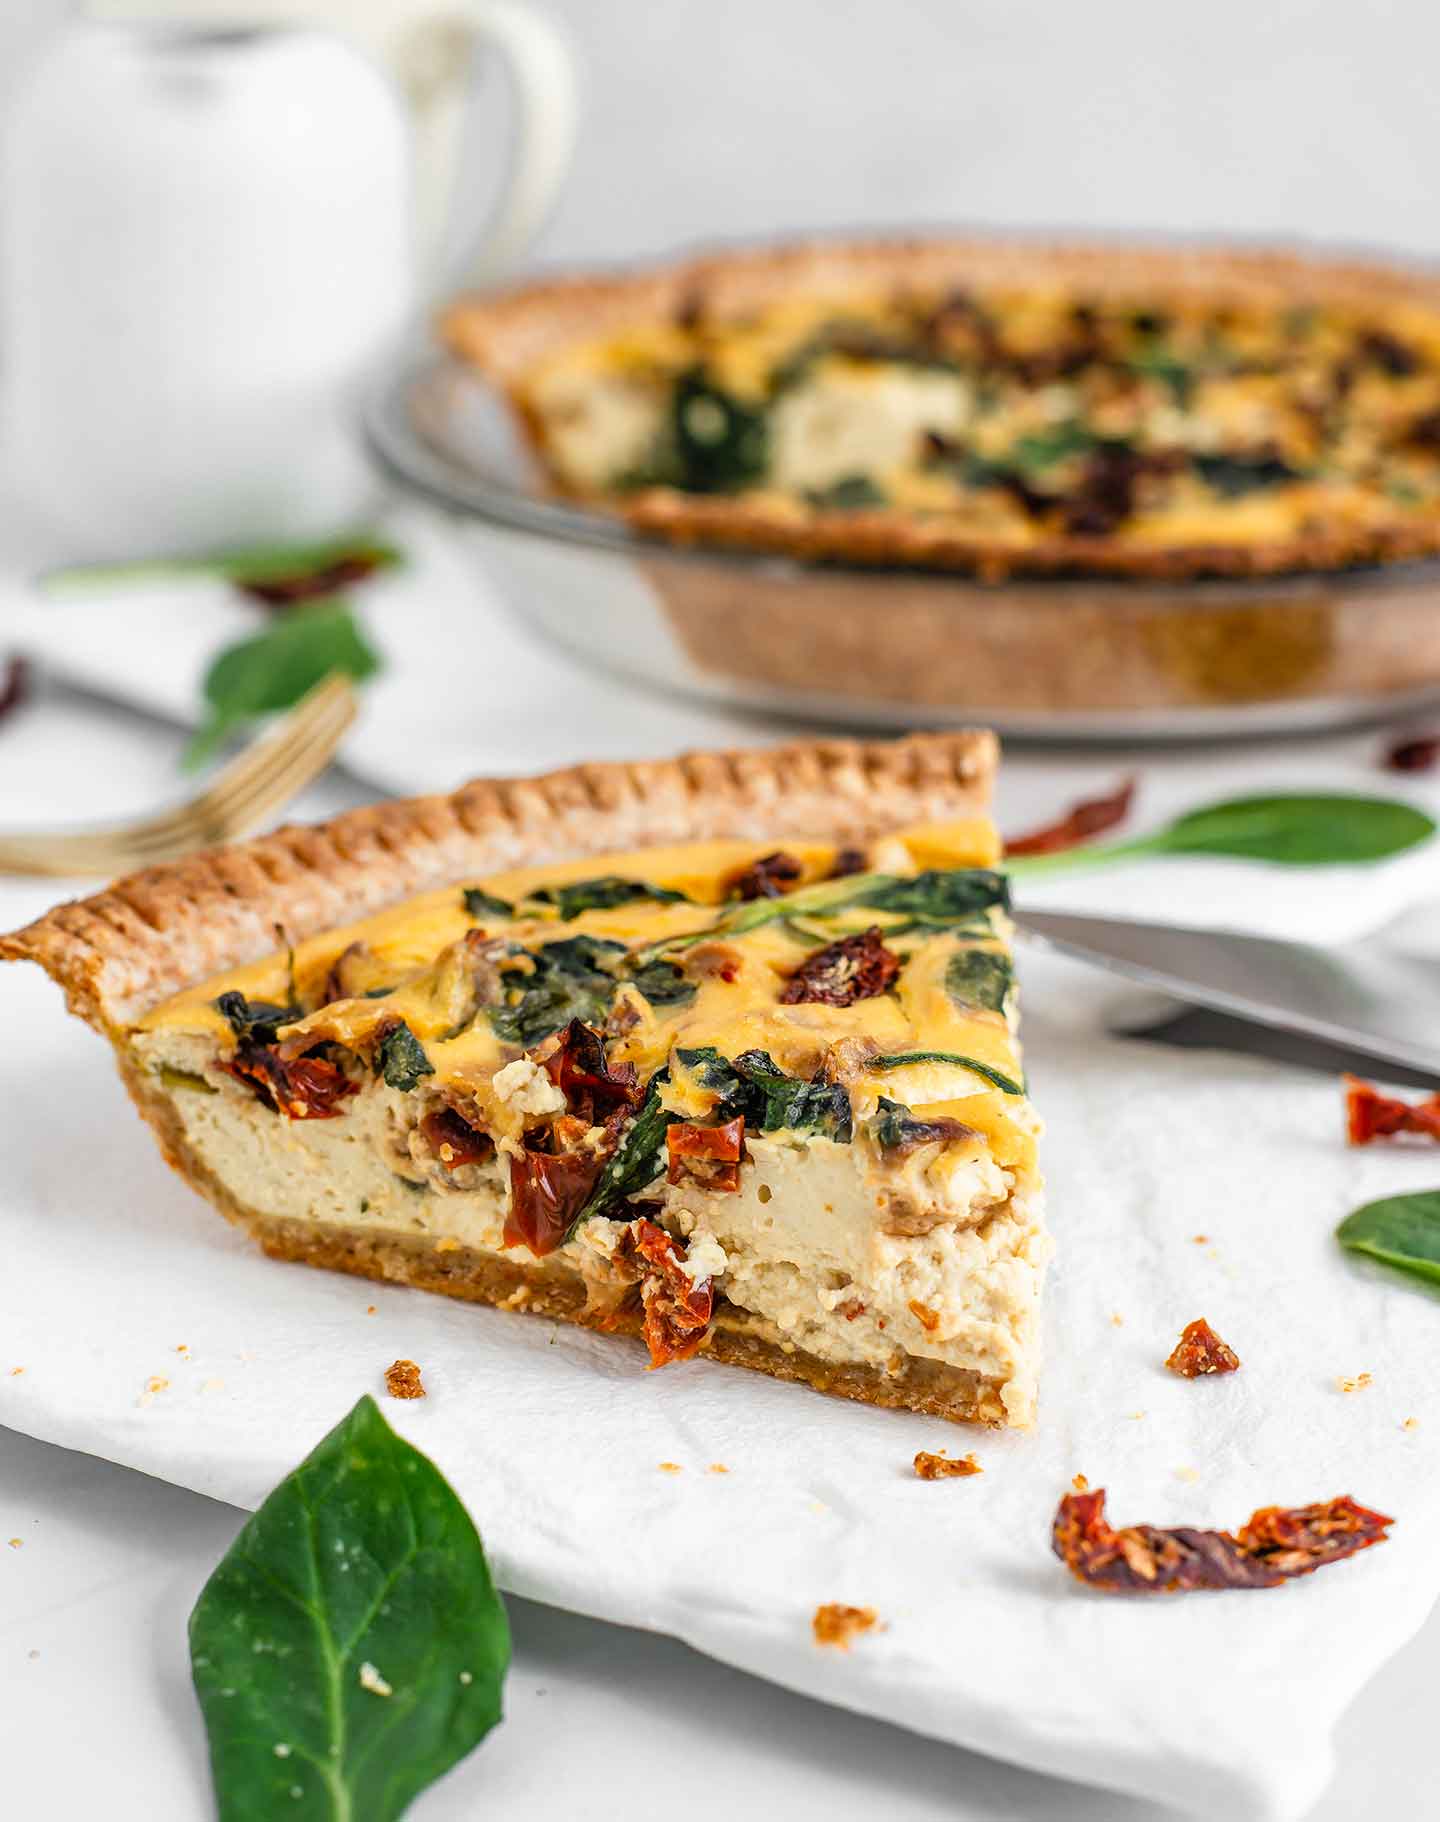 Side view of a slice of simple breakfast pie. The filling is thick and creamy with sun-dried tomatoes and spinach speckled throughout. The full pie with a piece missing is out of focus in the background.